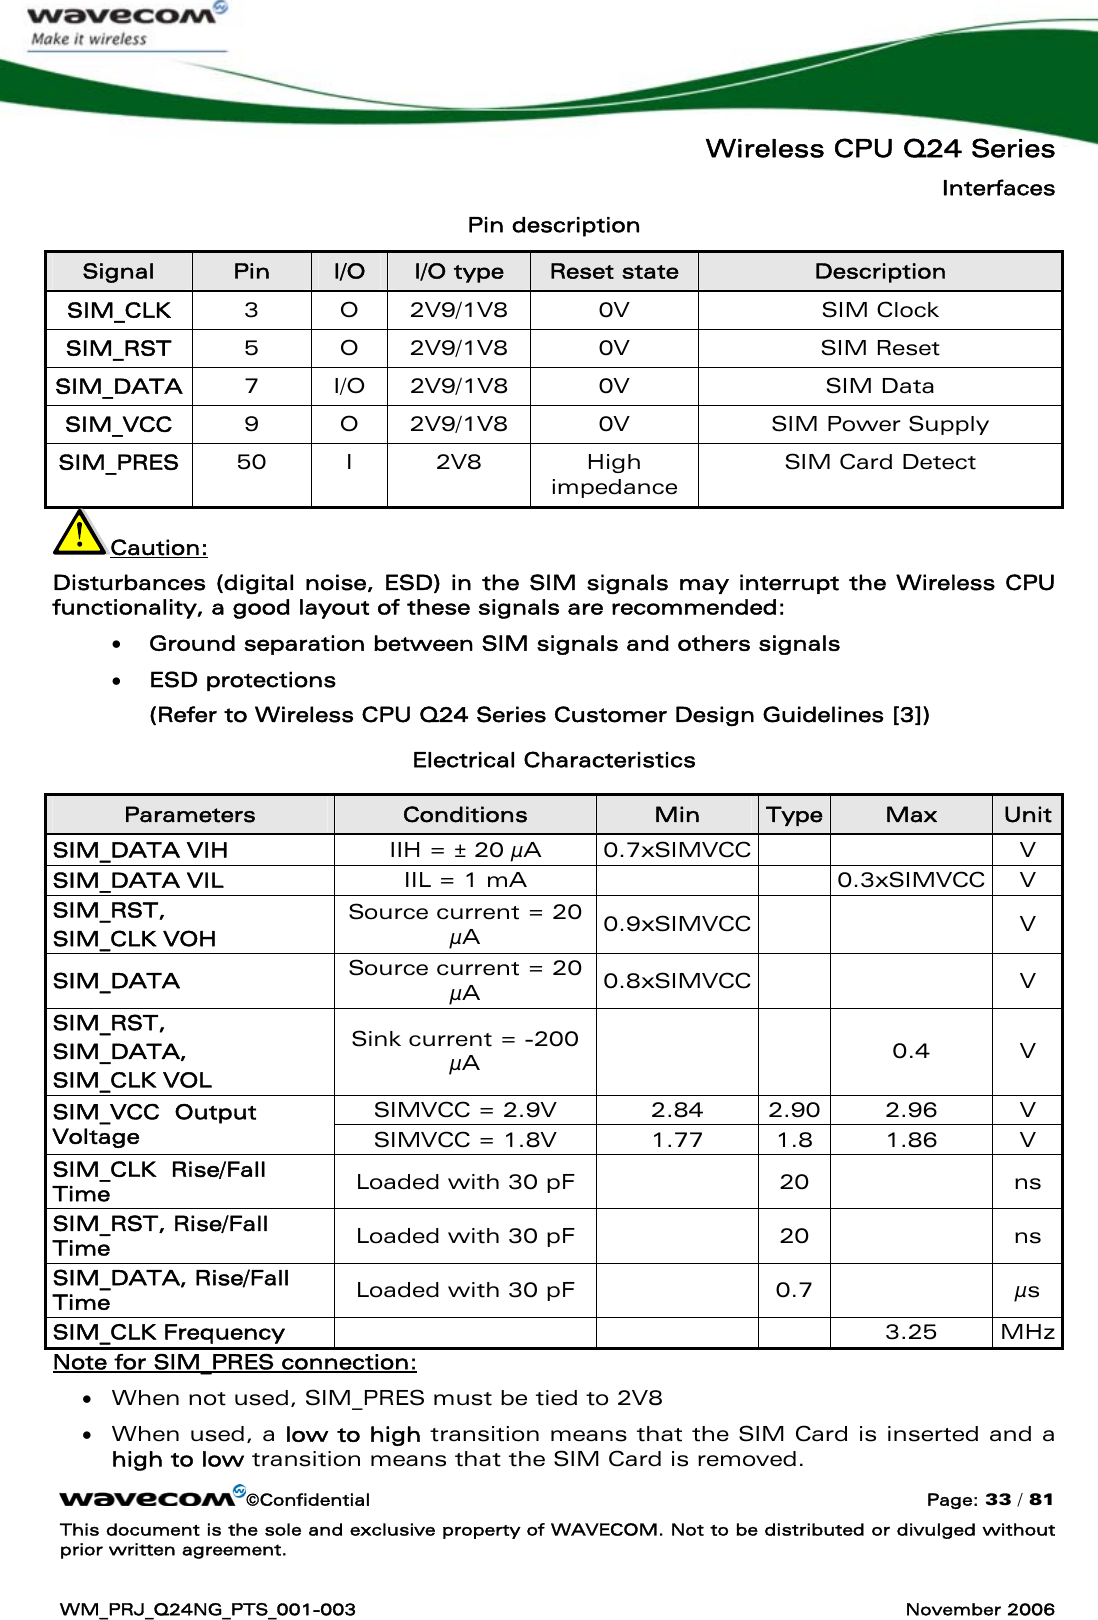   Wireless CPU Q24 Series Interfaces ©Confidential  Page: 33 / 81 This document is the sole and exclusive property of WAVECOM. Not to be distributed or divulged without prior written agreement.  WM_PRJ_Q24NG_PTS_001-003  November 2006  Pin description Signal  Pin  I/O  I/O type  Reset state  Description SIM_CLK  3 O 2V9/1V8  0V  SIM Clock SIM_RST  5 O 2V9/1V8  0V  SIM Reset SIM_DATA  7 I/O 2V9/1V8  0V  SIM Data SIM_VCC  9  O  2V9/1V8  0V  SIM Power Supply SIM_PRES  50 I  2V8  High impedance SIM Card Detect Caution: Disturbances (digital noise, ESD) in the SIM signals may interrupt the Wireless CPU functionality, a good layout of these signals are recommended: • Ground separation between SIM signals and others signals • ESD protections (Refer to Wireless CPU Q24 Series Customer Design Guidelines [3]) Electrical Characteristics Parameters  Conditions  Min  Type  Max  Unit SIM_DATA VIH  IIH = ± 20 μA  0.7xSIMVCC   V SIM_DATA VIL  IIL = 1 mA      0.3xSIMVCC V SIM_RST, SIM_CLK VOH Source current = 20 μA  0.9xSIMVCC   V SIM_DATA  Source current = 20 μA  0.8xSIMVCC   V SIM_RST, SIM_DATA, SIM_CLK VOL Sink current = -200 μA    0.4 V SIMVCC = 2.9V  2.84  2.90  2.96  V SIM_VCC  Output Voltage  SIMVCC = 1.8V  1.77  1.8  1.86  V SIM_CLK  Rise/Fall Time  Loaded with 30 pF    20    ns SIM_RST, Rise/Fall Time  Loaded with 30 pF    20    ns SIM_DATA, Rise/Fall Time  Loaded with 30 pF    0.7    μs SIM_CLK Frequency     3.25 MHz Note for SIM_PRES connection: • When not used, SIM_PRES must be tied to 2V8  • When used, a low to high transition means that the SIM Card is inserted and a high to low transition means that the SIM Card is removed.  